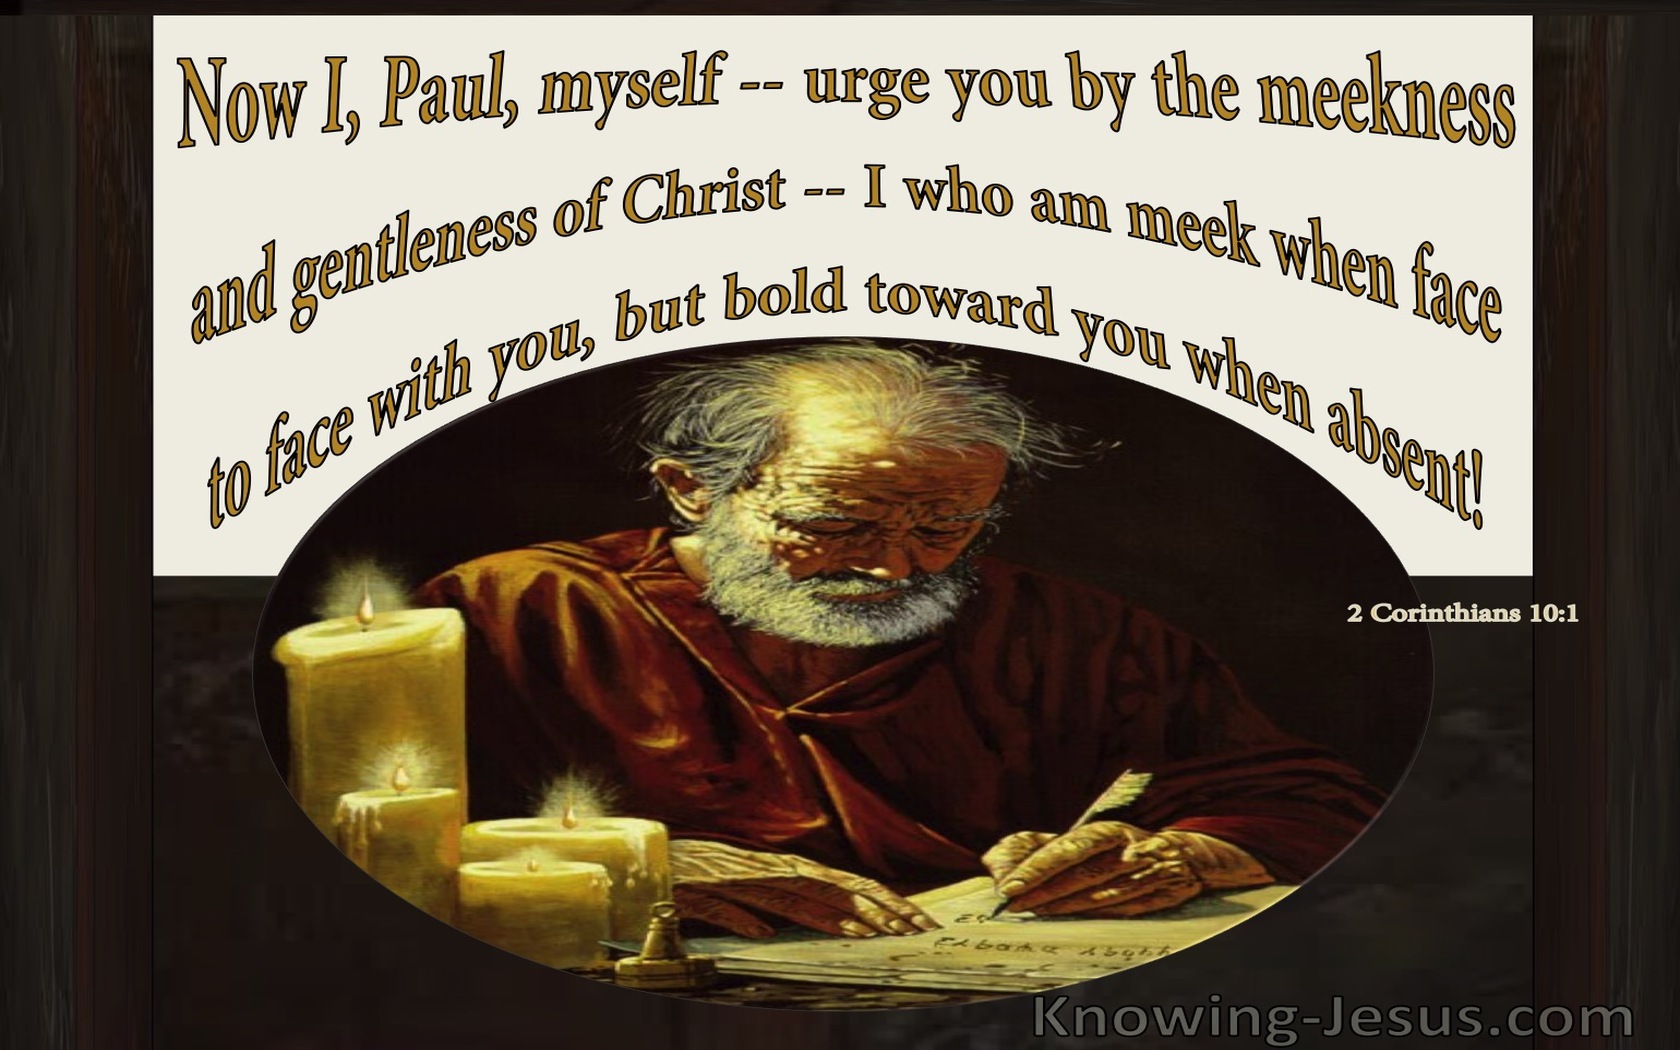 2 Corinthians 10:1 Paul Urges By The Meekness And Gentleness Of Christ (brown)